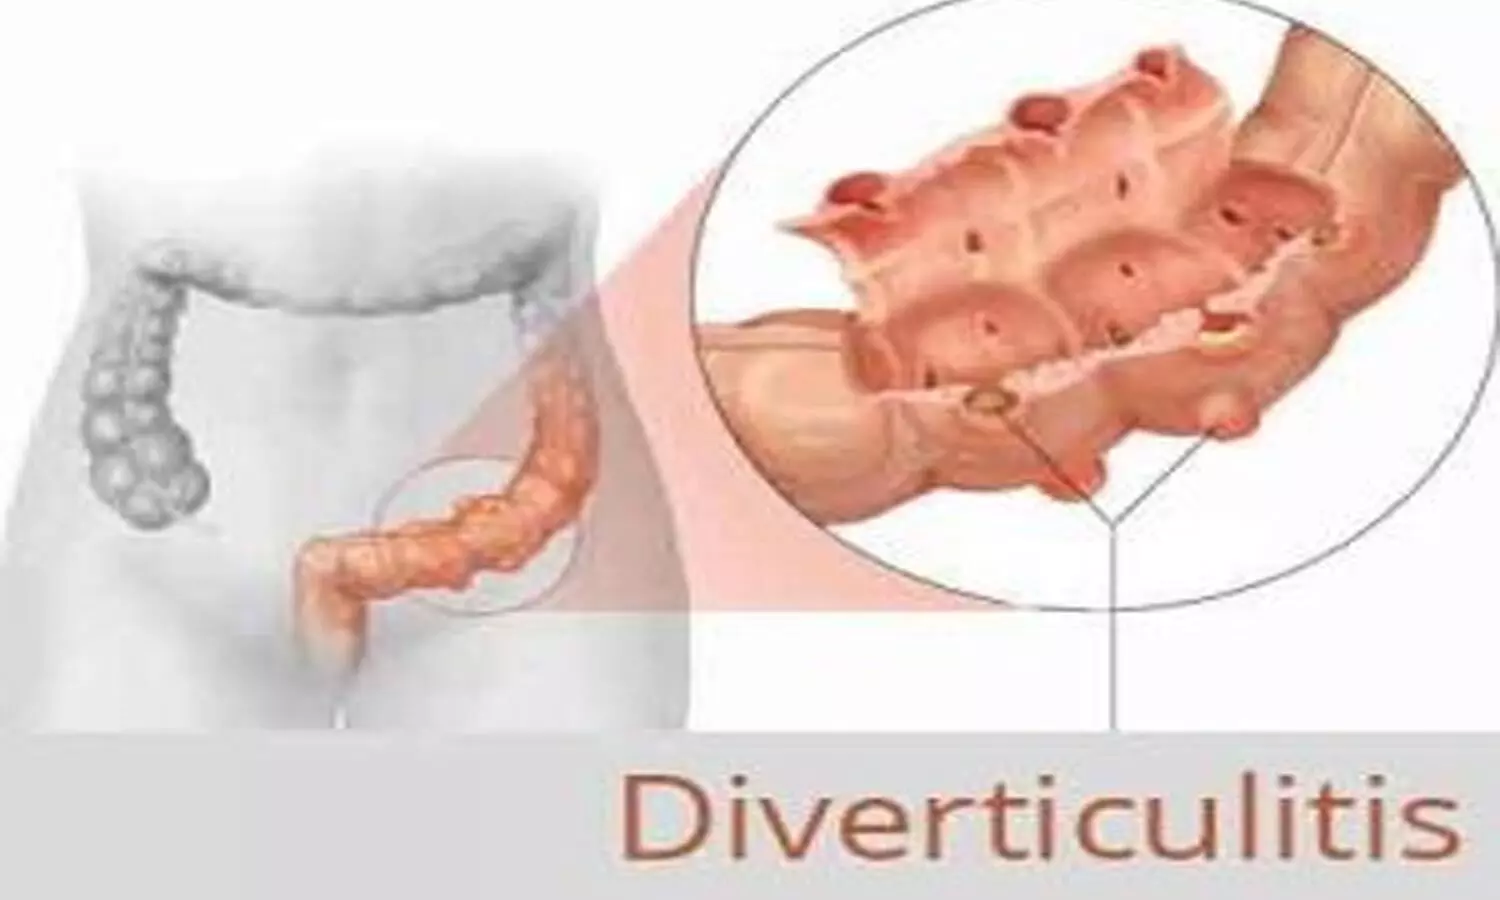 Updated  Guidelines for Treatment for Diverticulitis  released by ASCRS